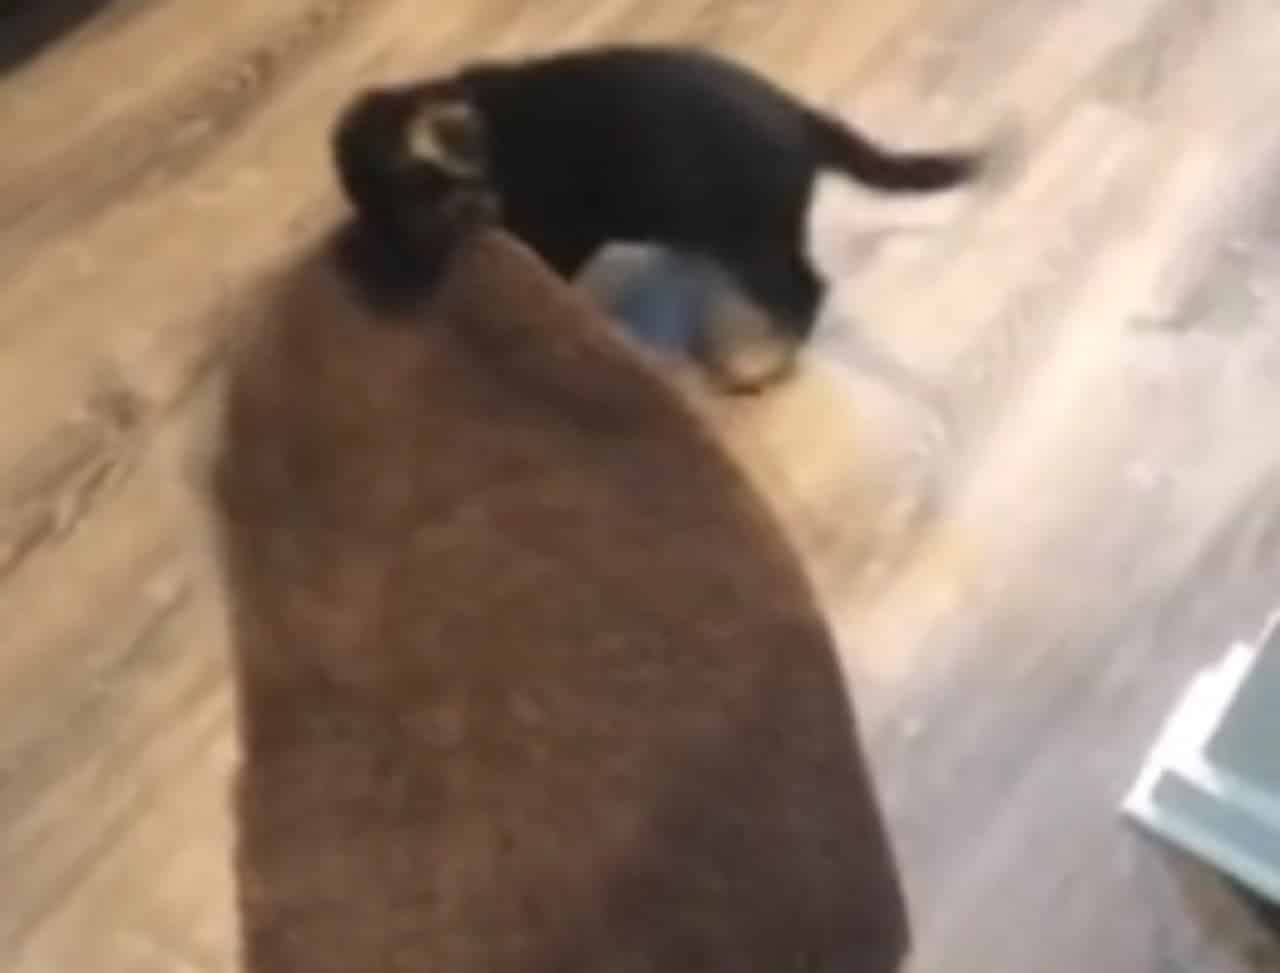 Darling puppy drags a rug around the house